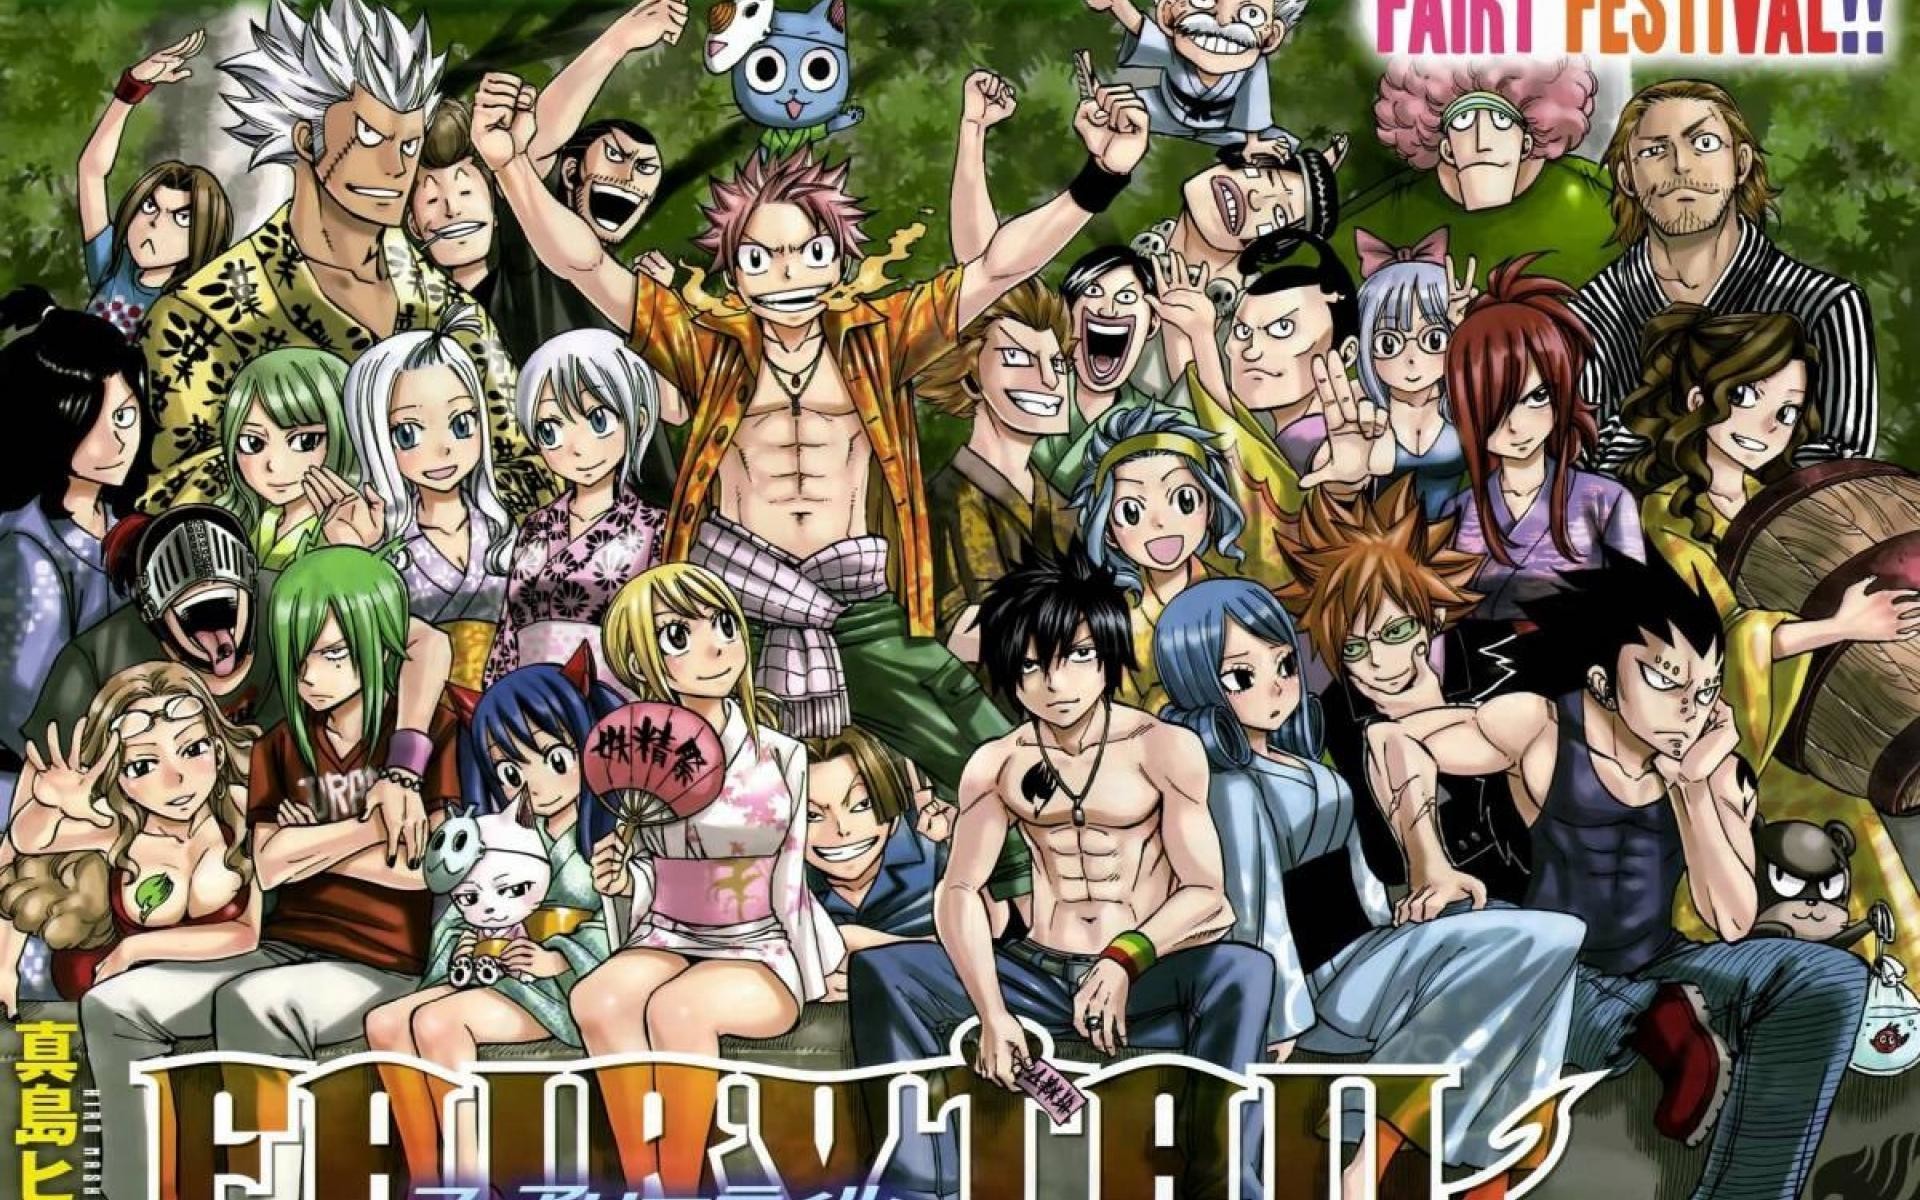 Fairy Tail Chibi Wallpaper 67 images